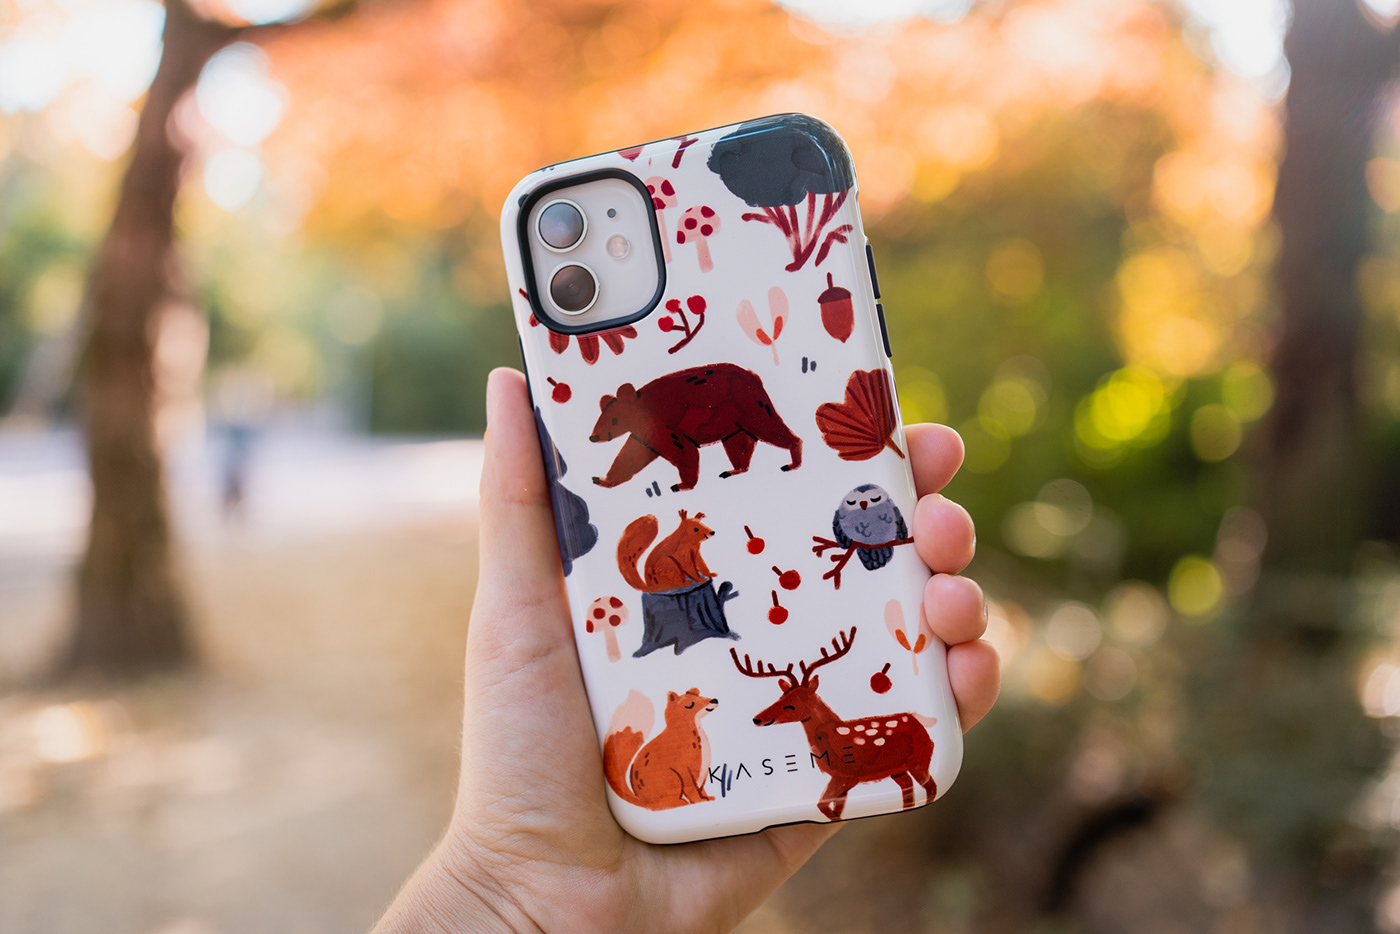 Hand painted illustration of woodland animals printed on a phone case by Kase Me Design.